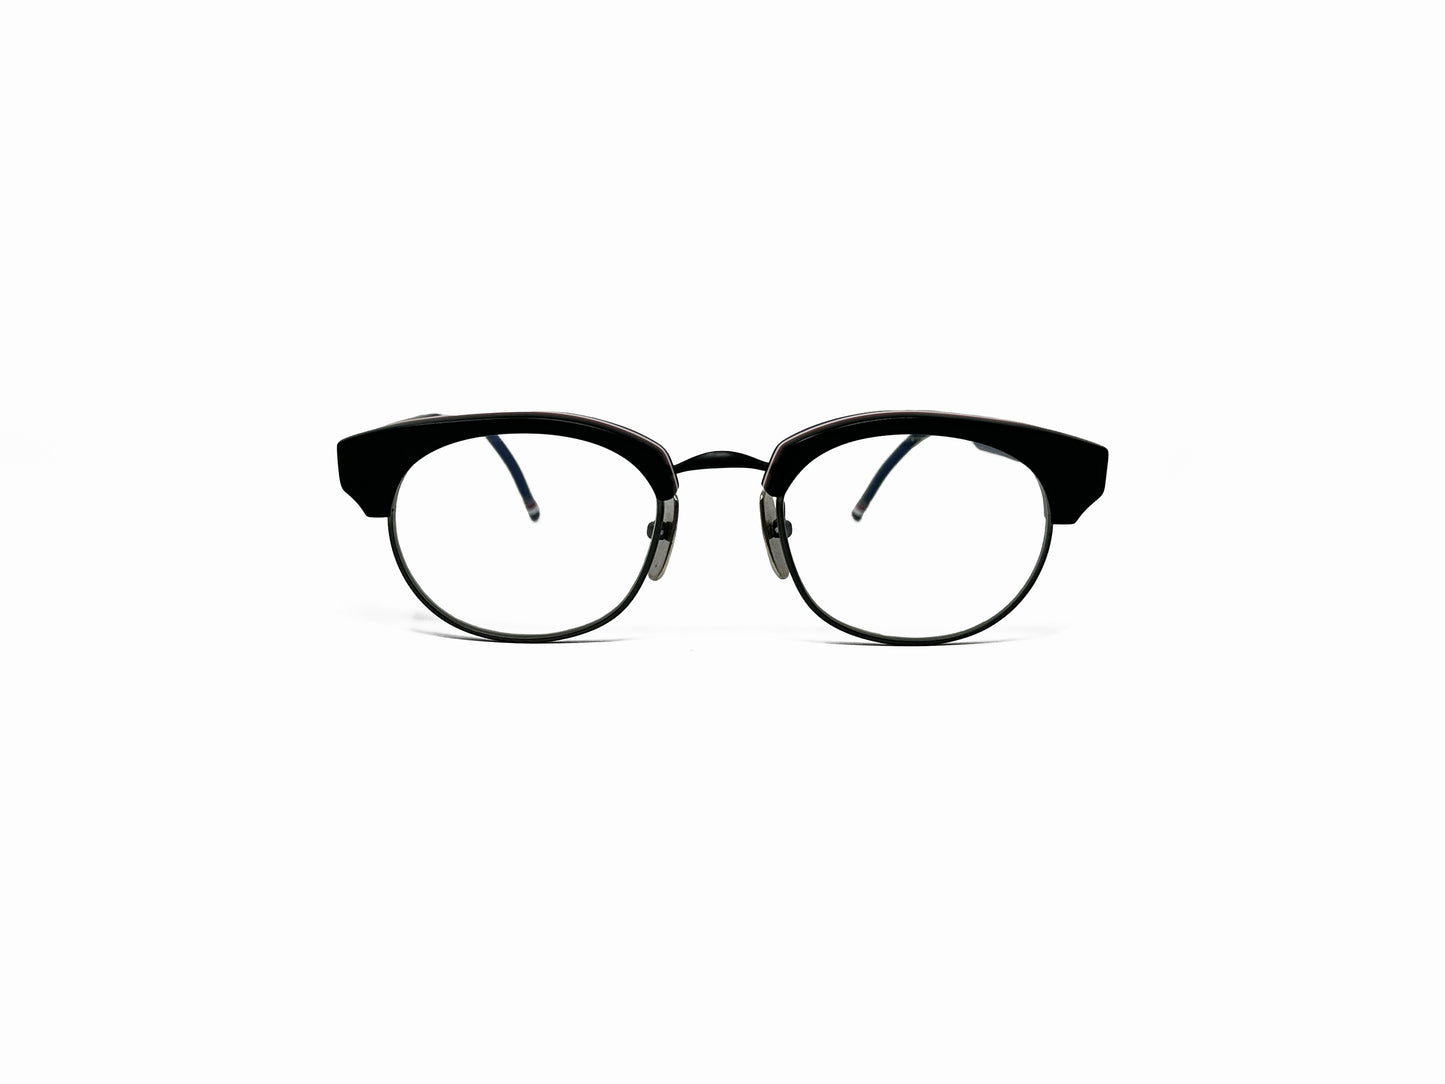 Thom Browne rounded half-rim optical frame. Model: 702. Color: Black with silver metal nose pads. Front view. 